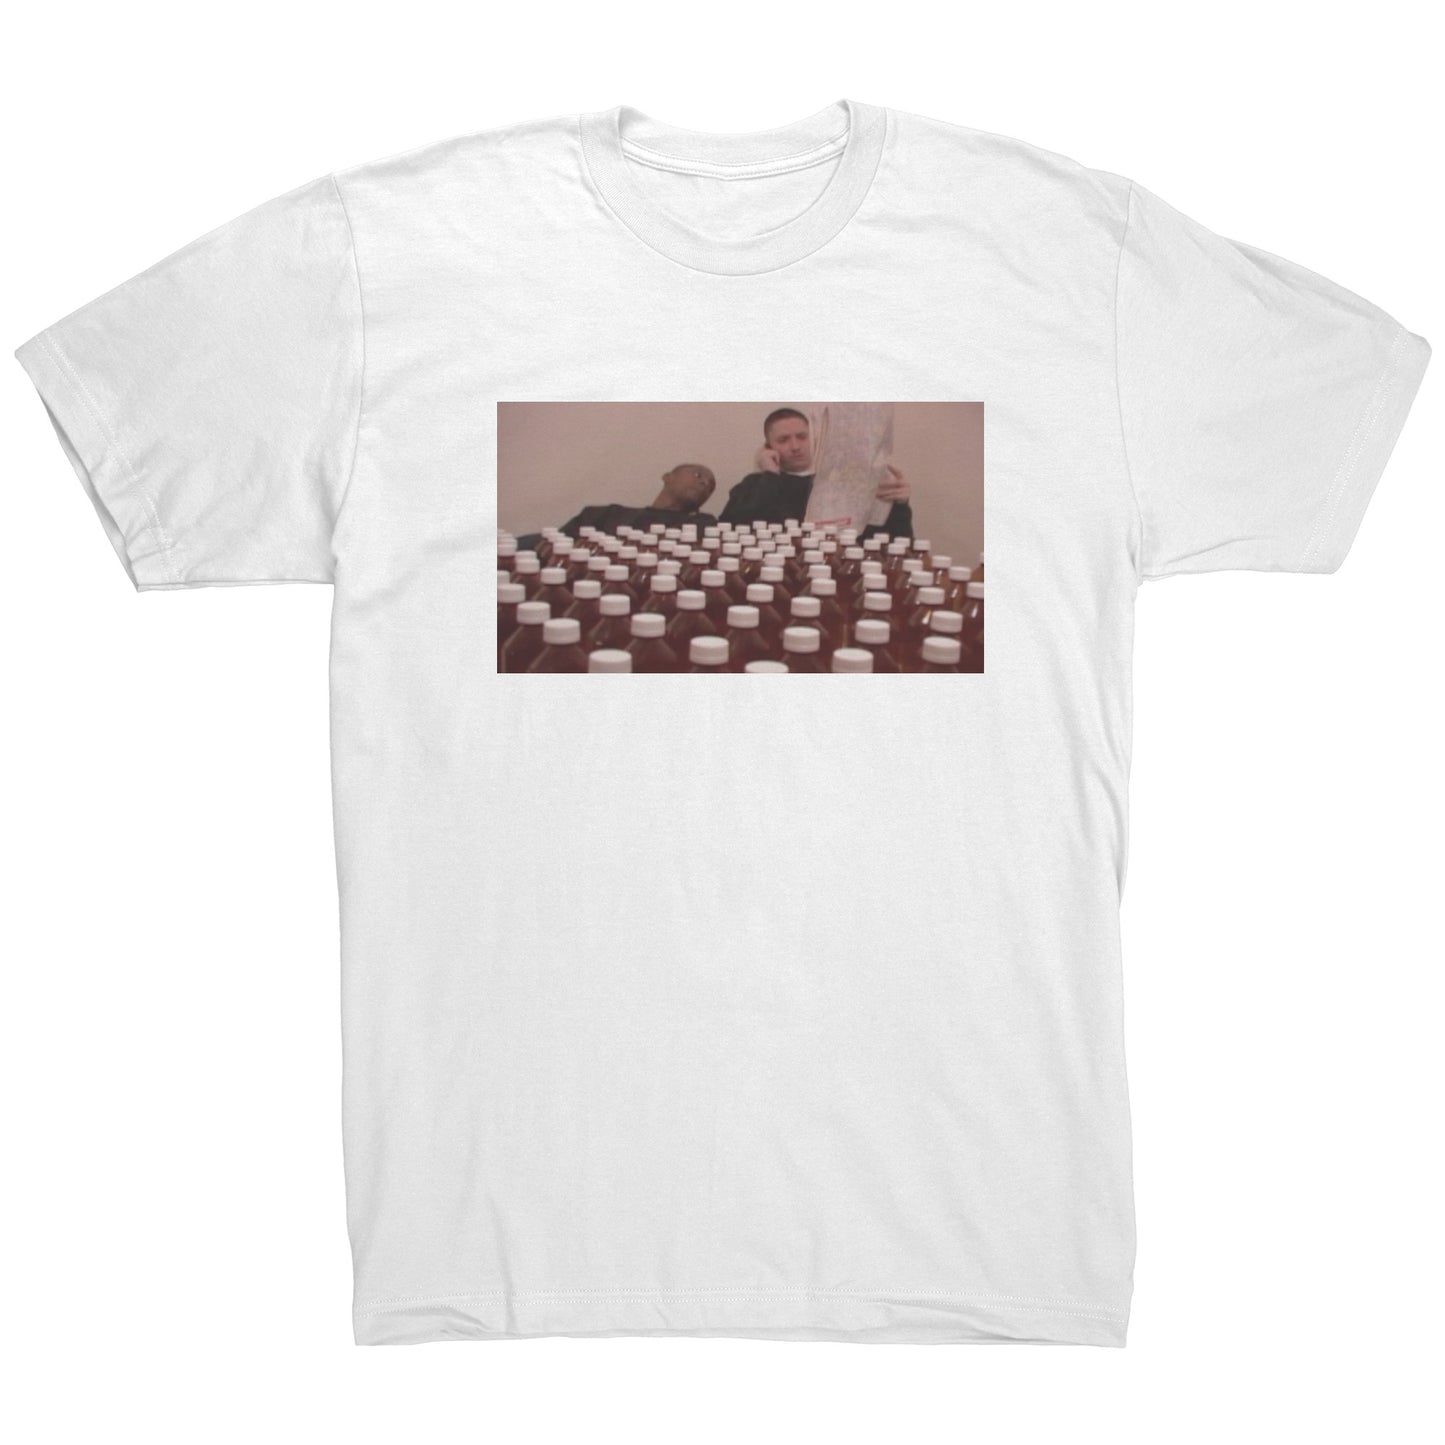 Trust None Tee Shirt - Sippin on Syrup